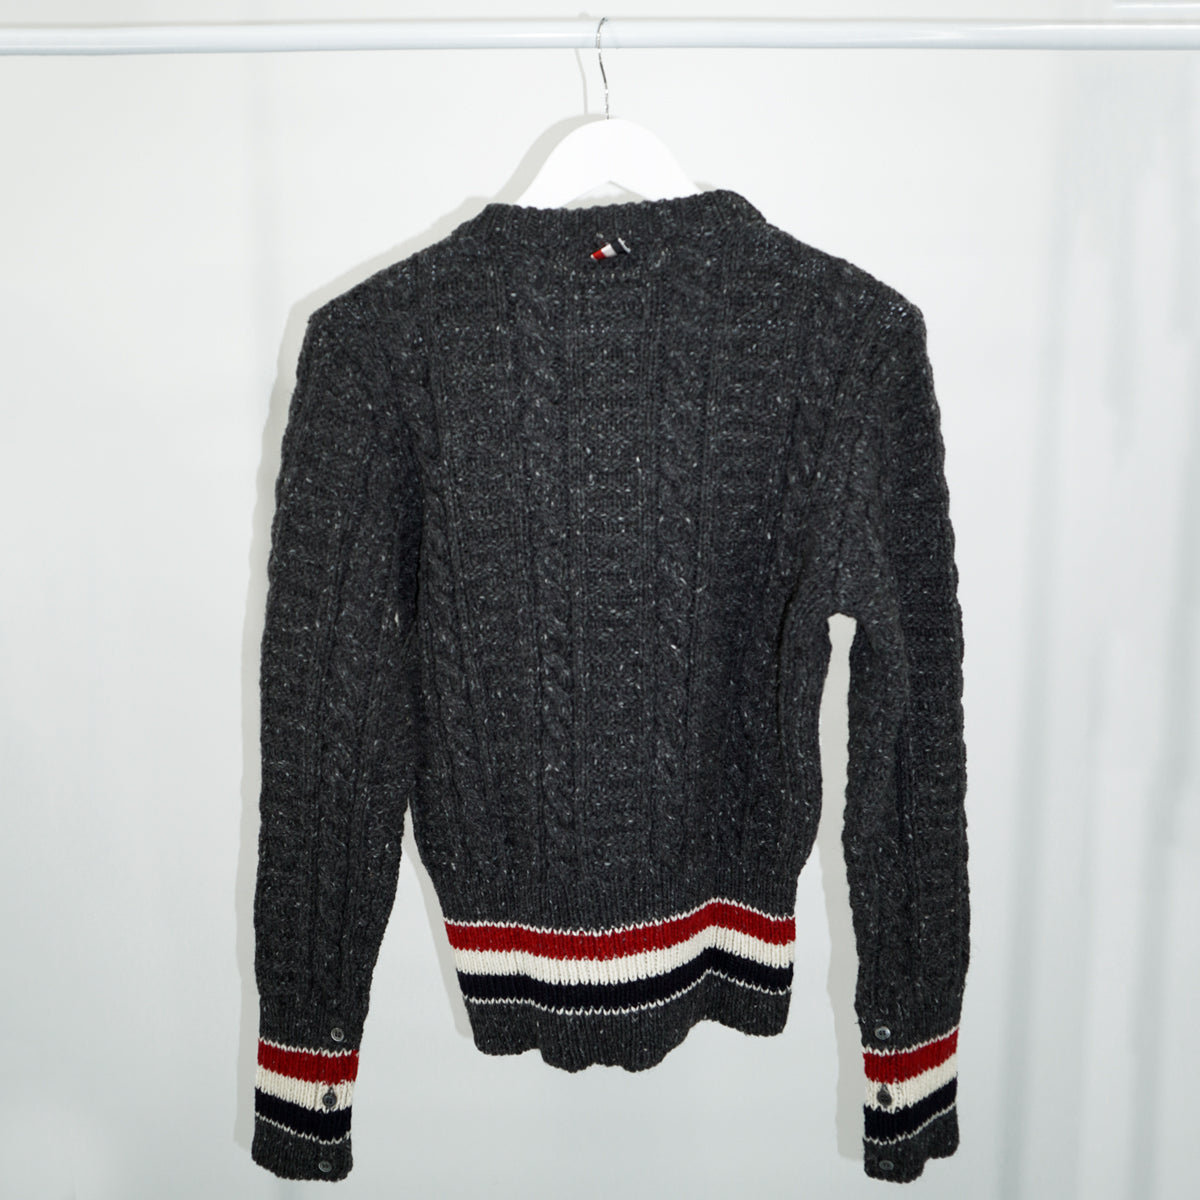 Thom Browne Mohair Mix Donegal Crew Knit Jumper in Grey